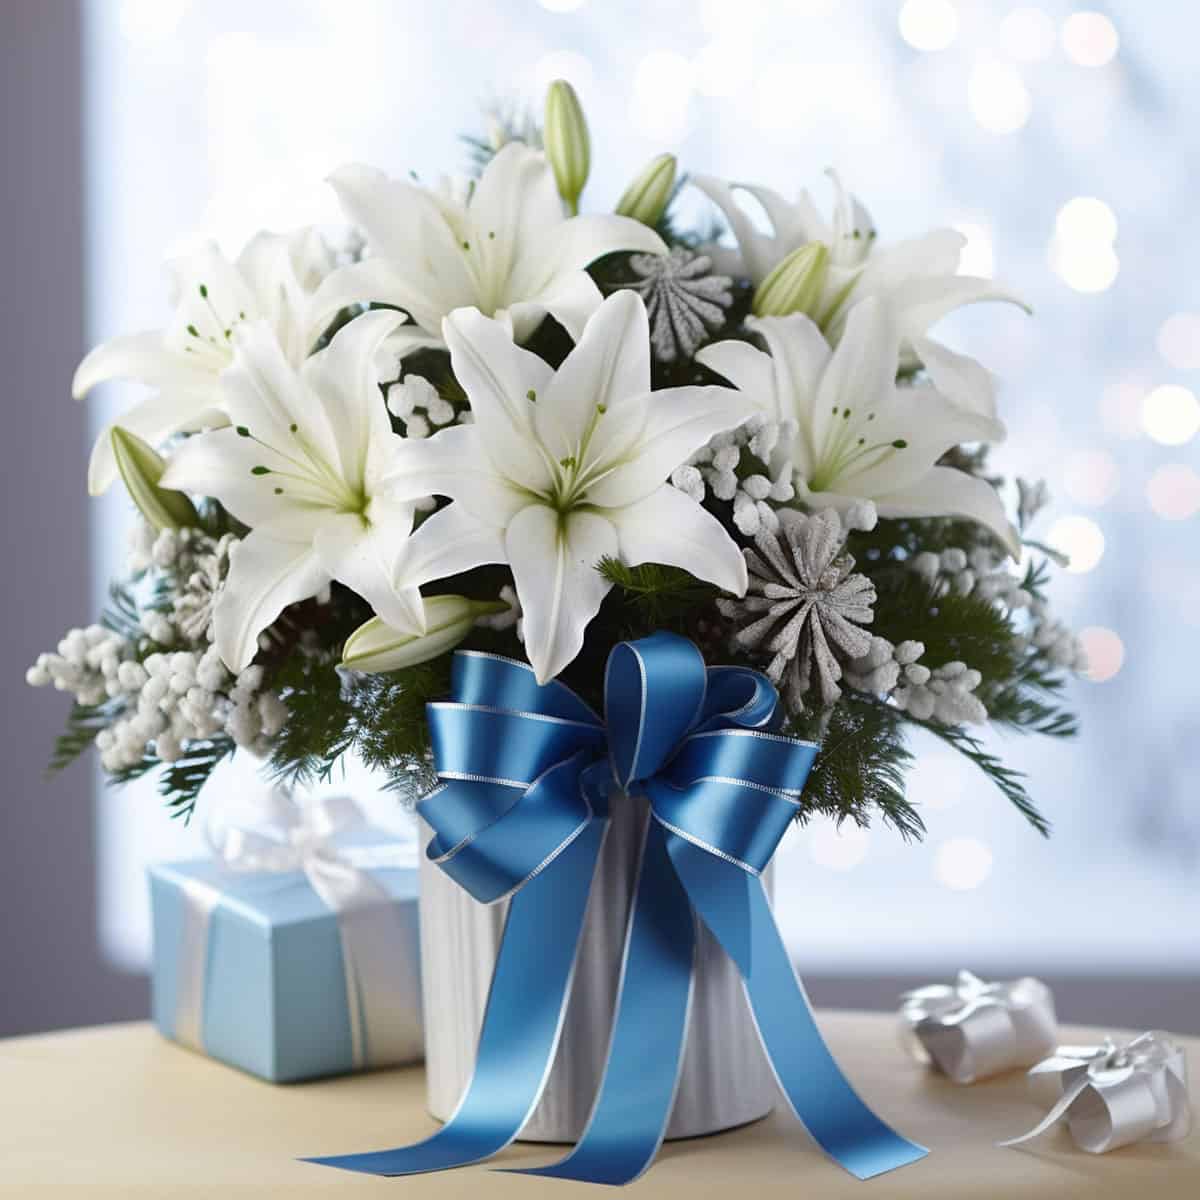 winter wonderland-inspired flower arrangement, choose white lilies and chrysanthemums as your floral anchors, make it festive with christmas background and blue ribbon